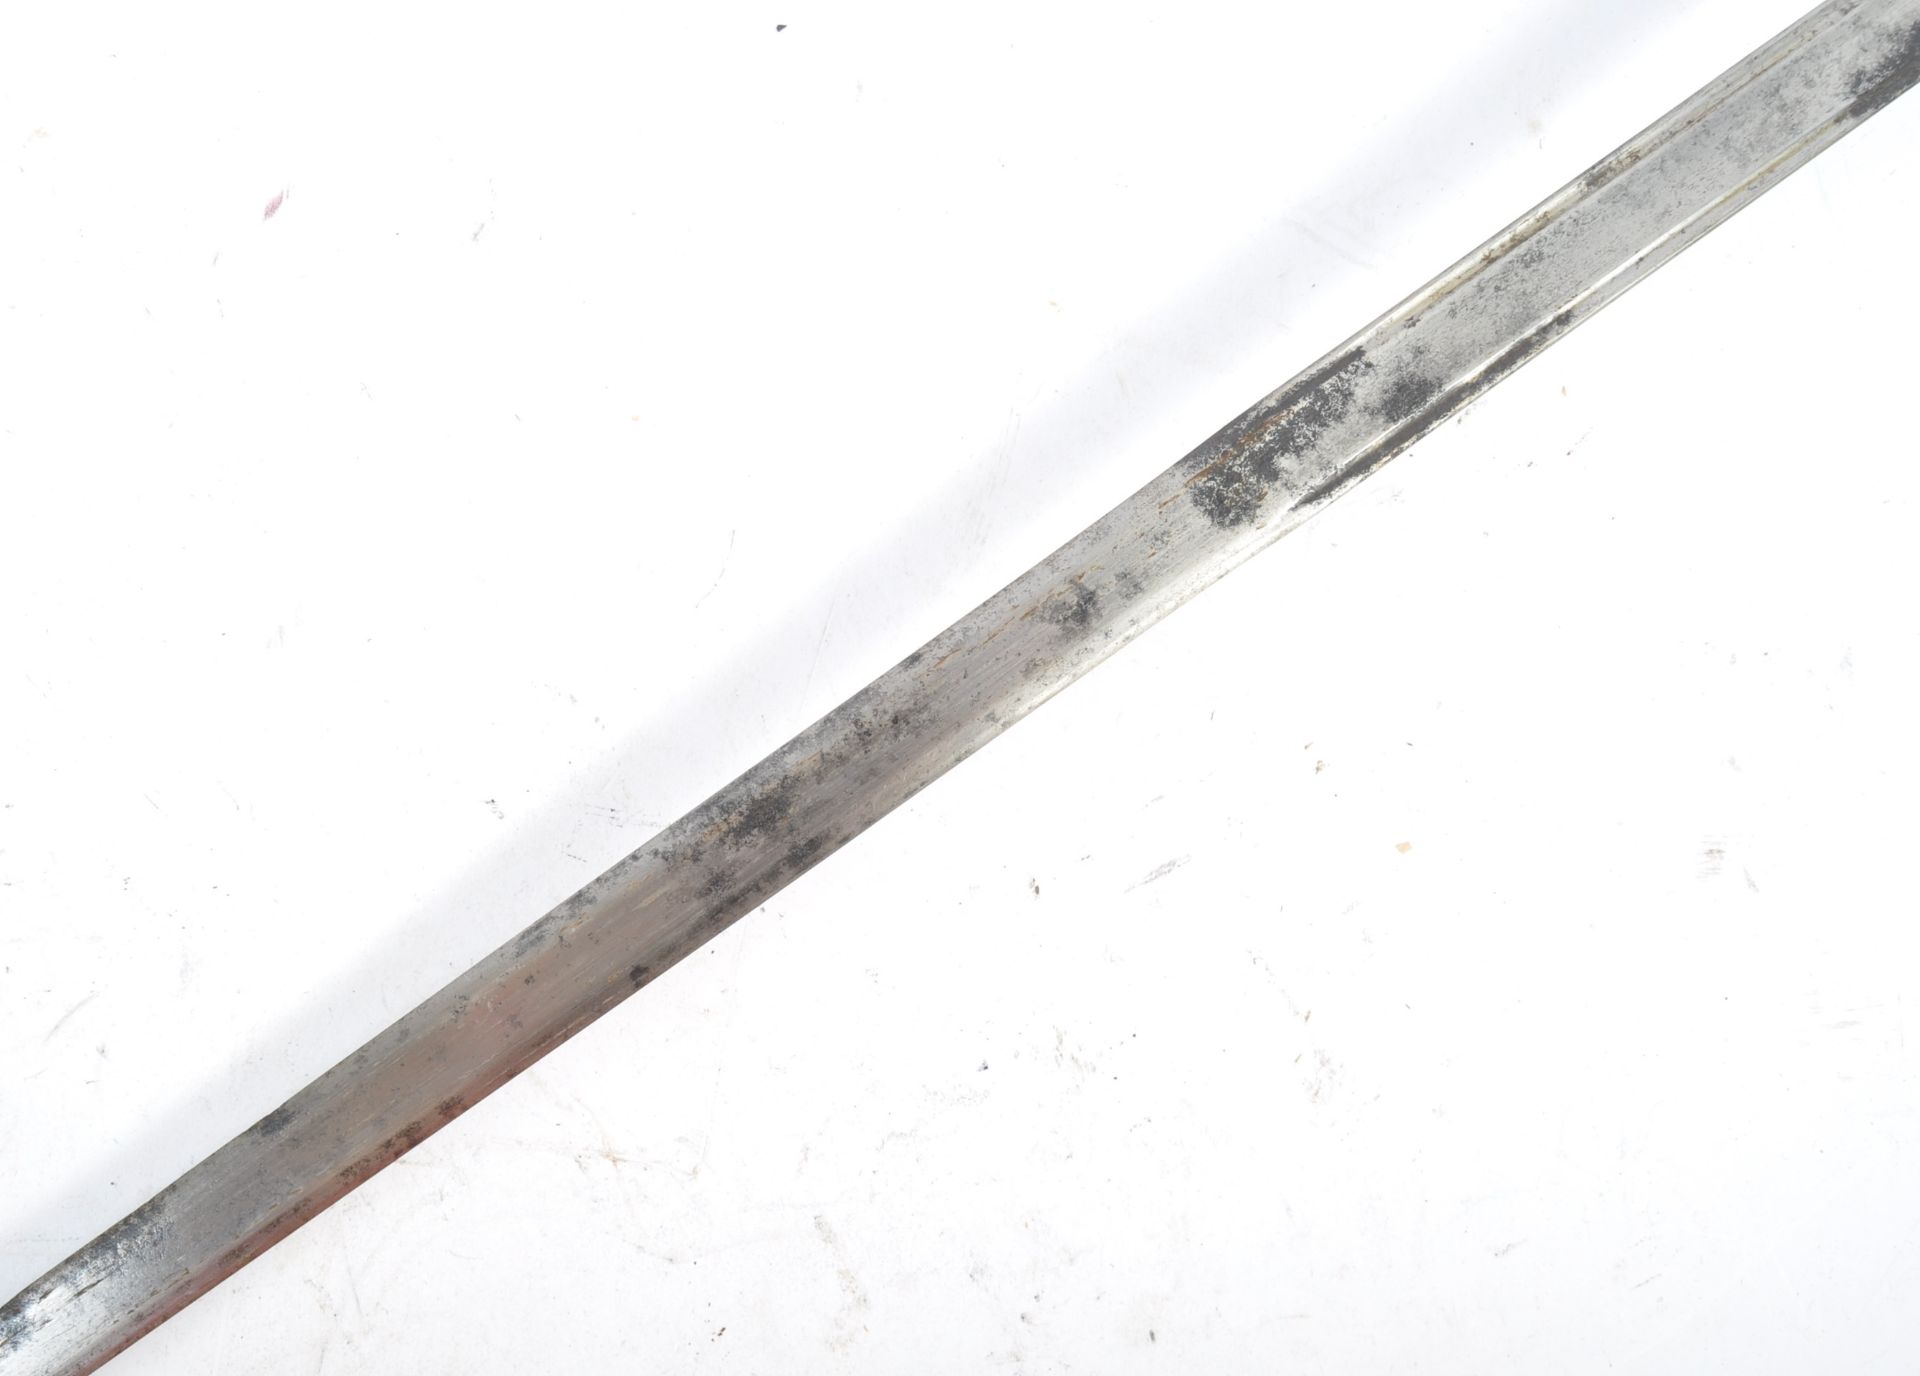 UNUSUAL 19TH CENTURY SCOTTISH OFFICERS SWORD WITH TOLEDO BLADE - Image 2 of 8